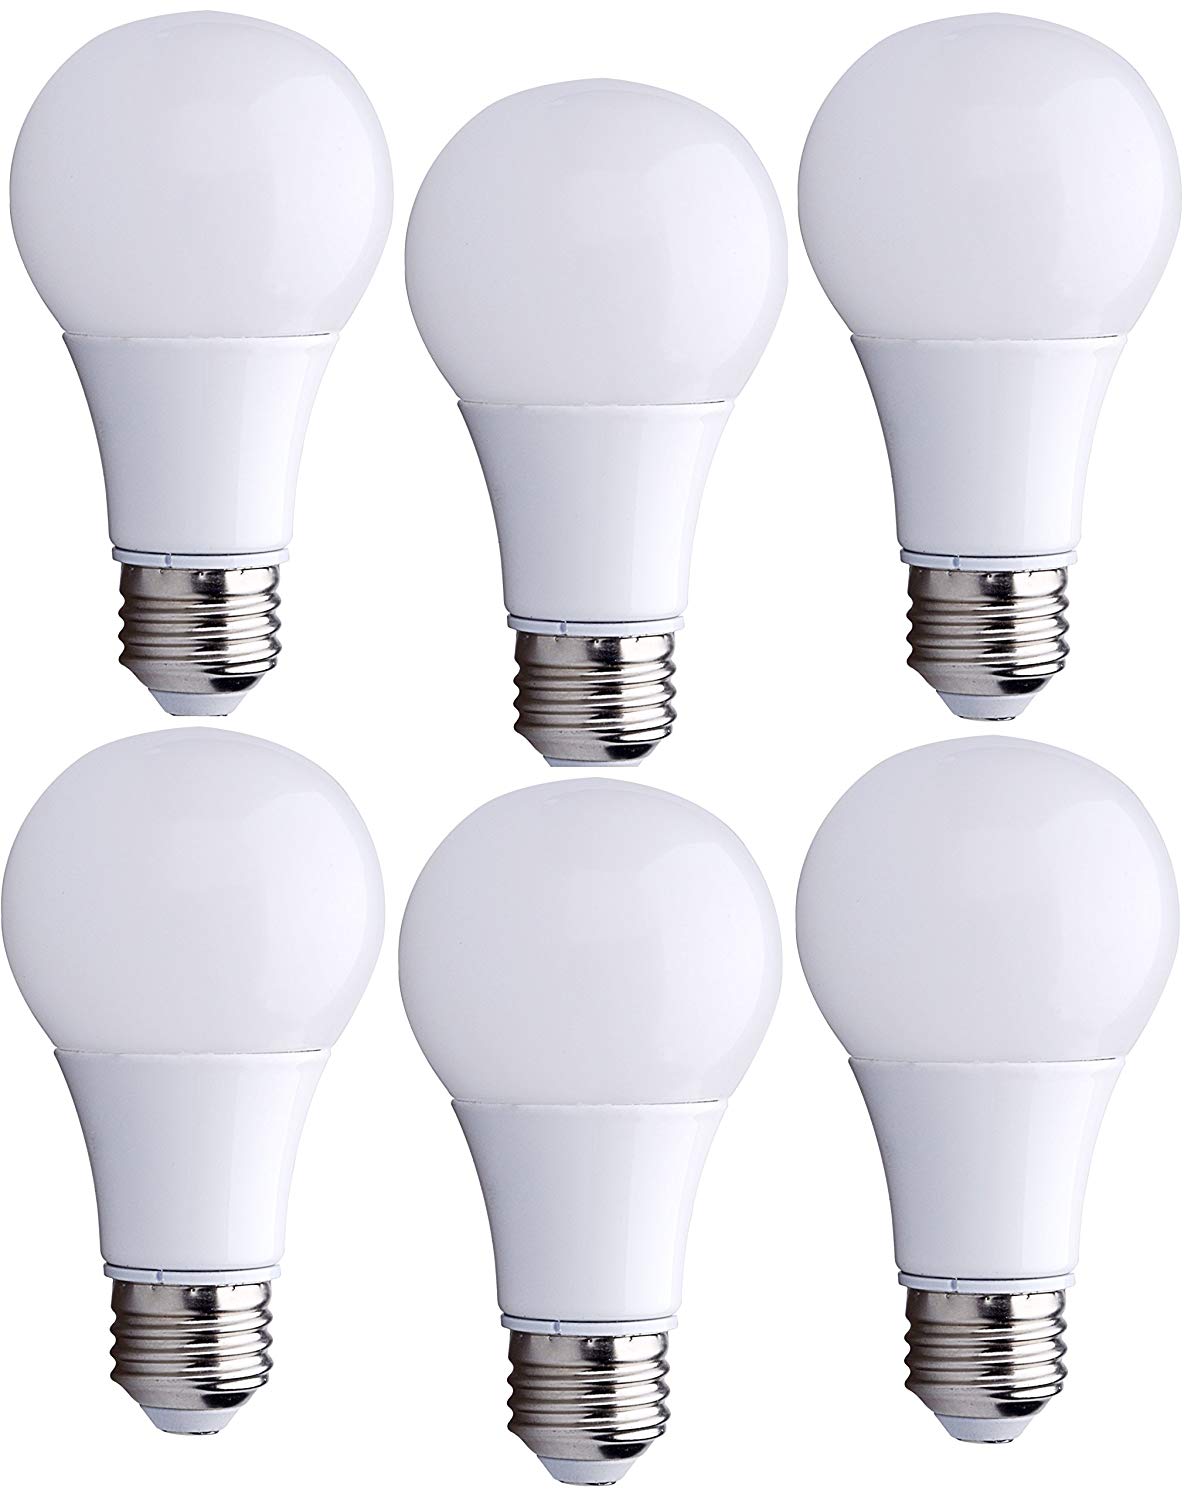 Bulb Light From 8W to 25 W